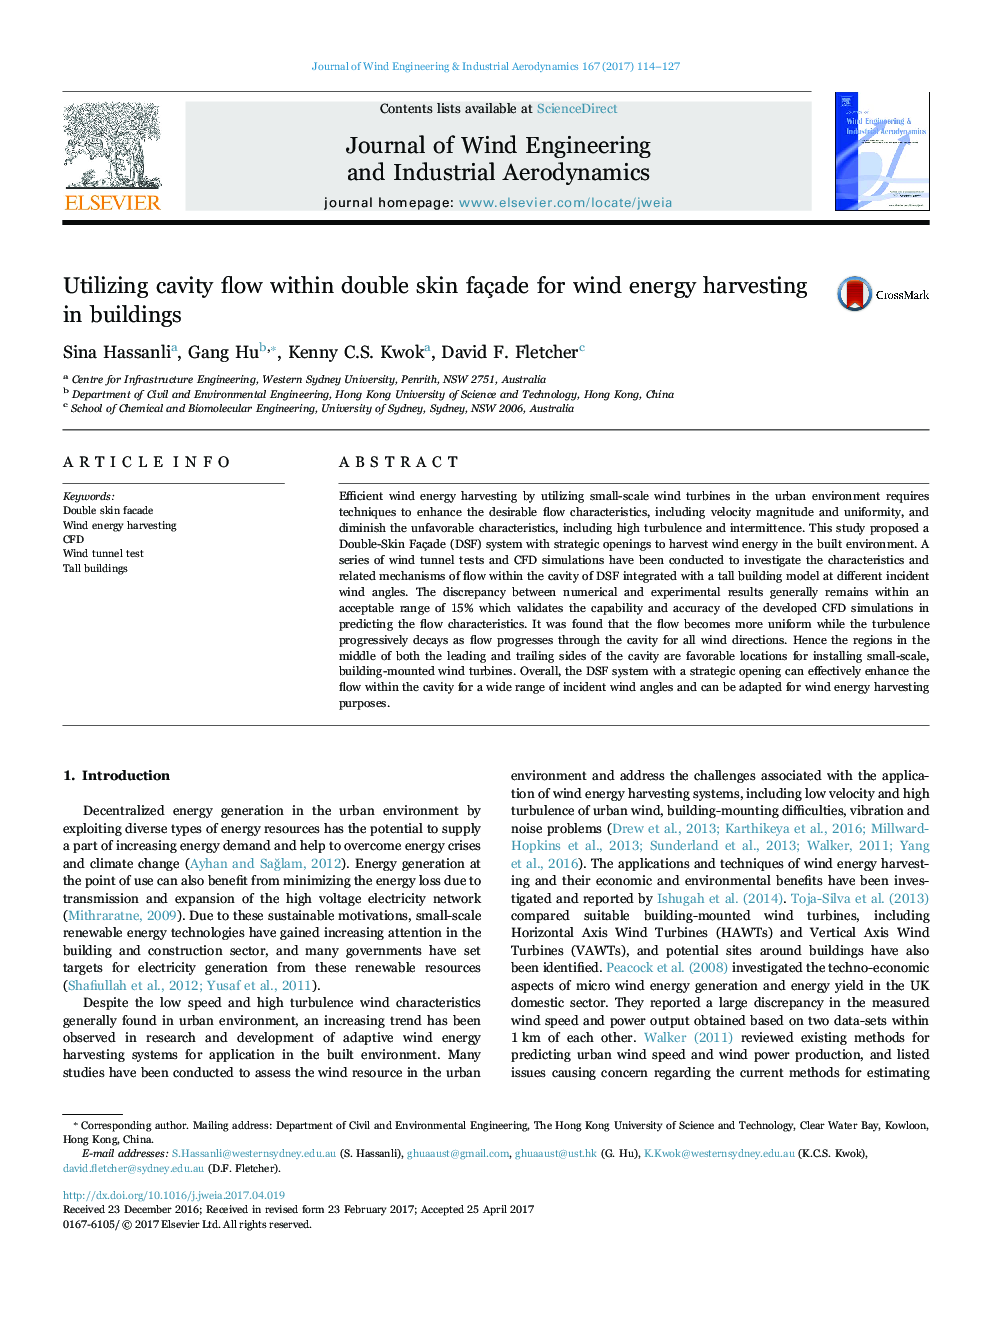 Utilizing cavity flow within double skin façade for wind energy harvesting in buildings